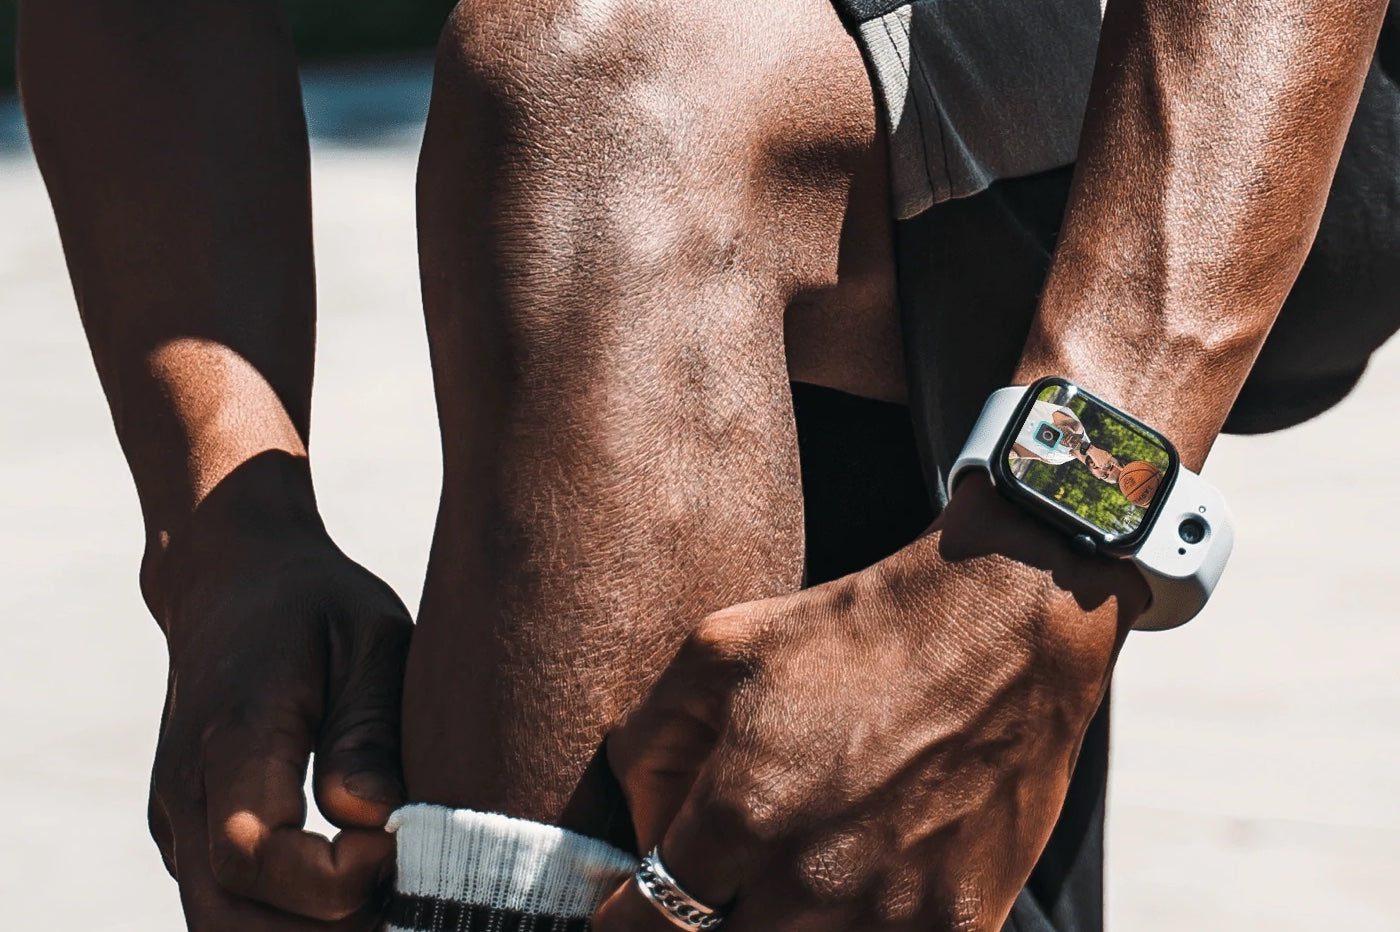 Here's How to Check Blood Pressure on Your Apple Watch– Wristcam